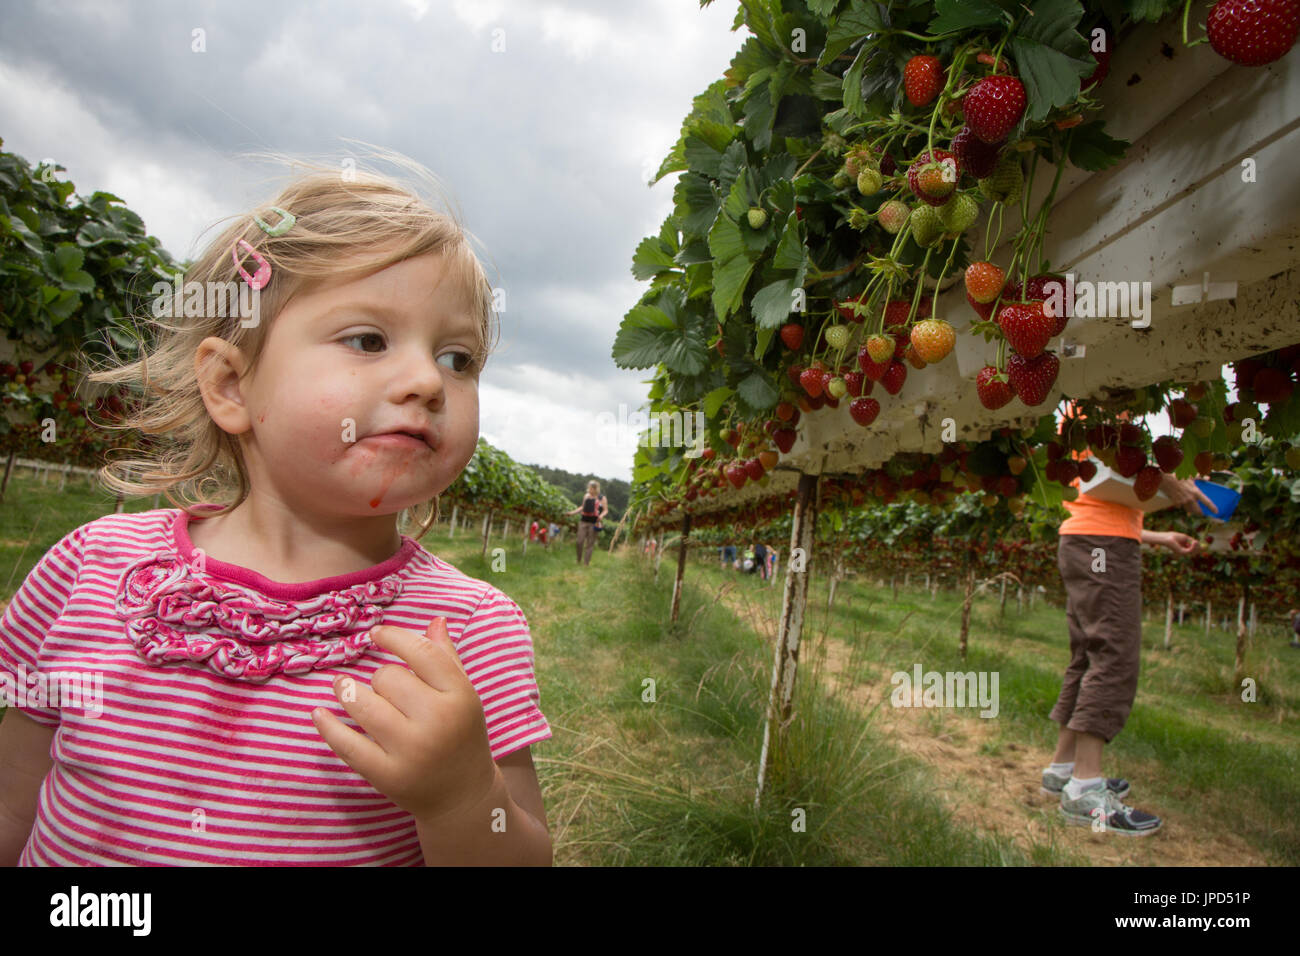 A toddler girl of 18 months eating strawberries at a pick-your-own-farm in England. Her mother and baby sister are in the background Stock Photo